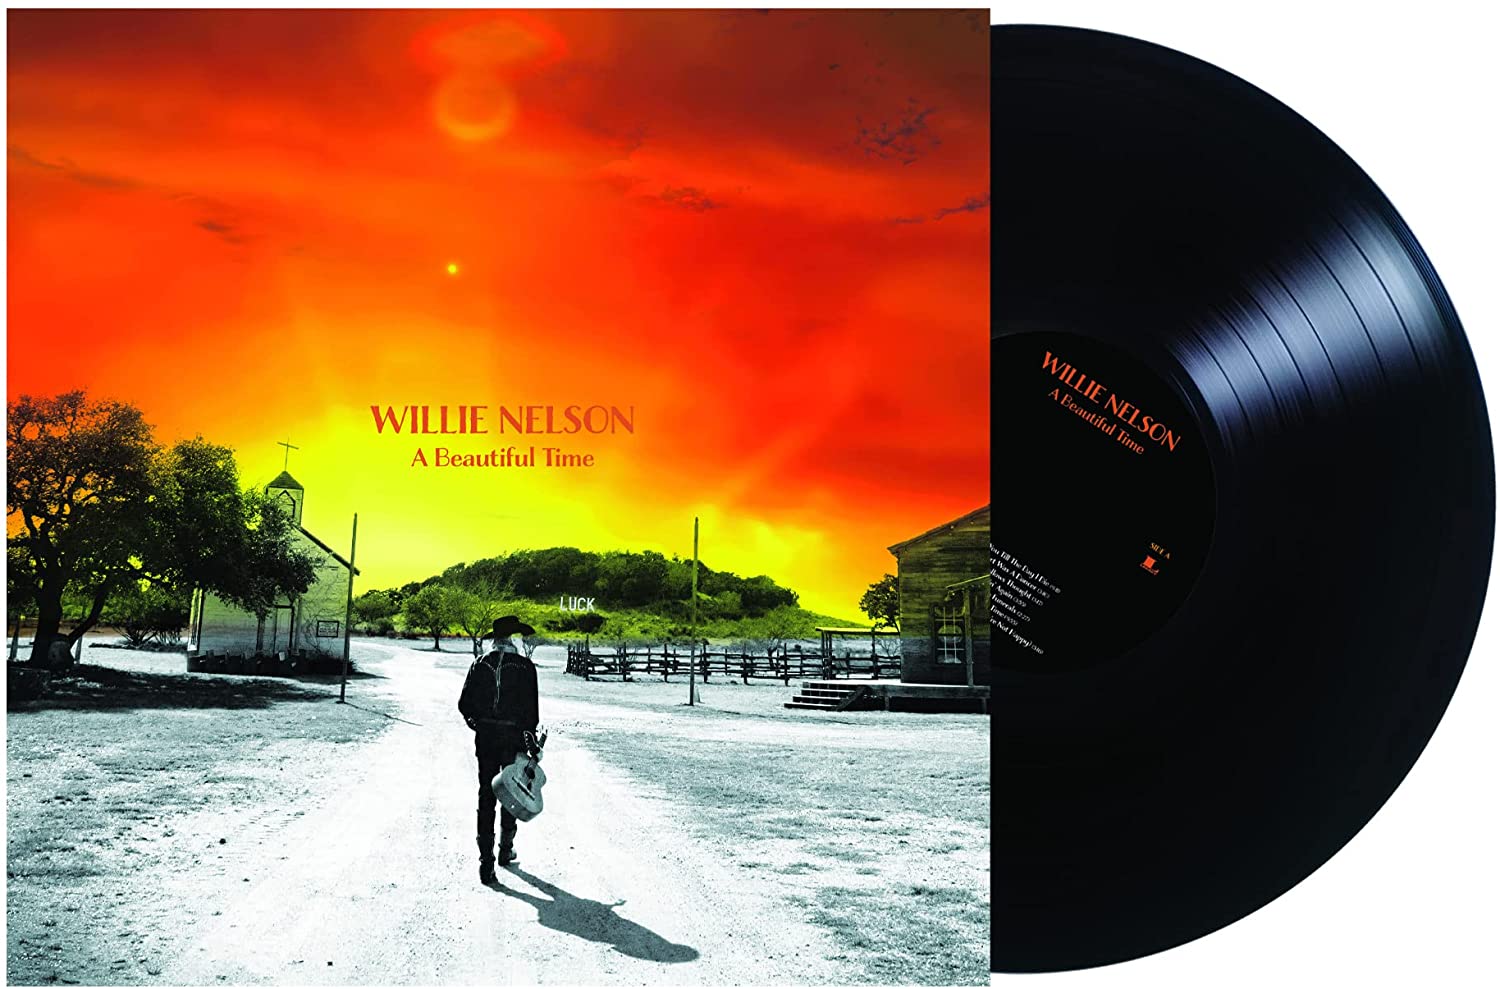 WILLIE NELSON - A Beautiful Time - LP - Vinyl